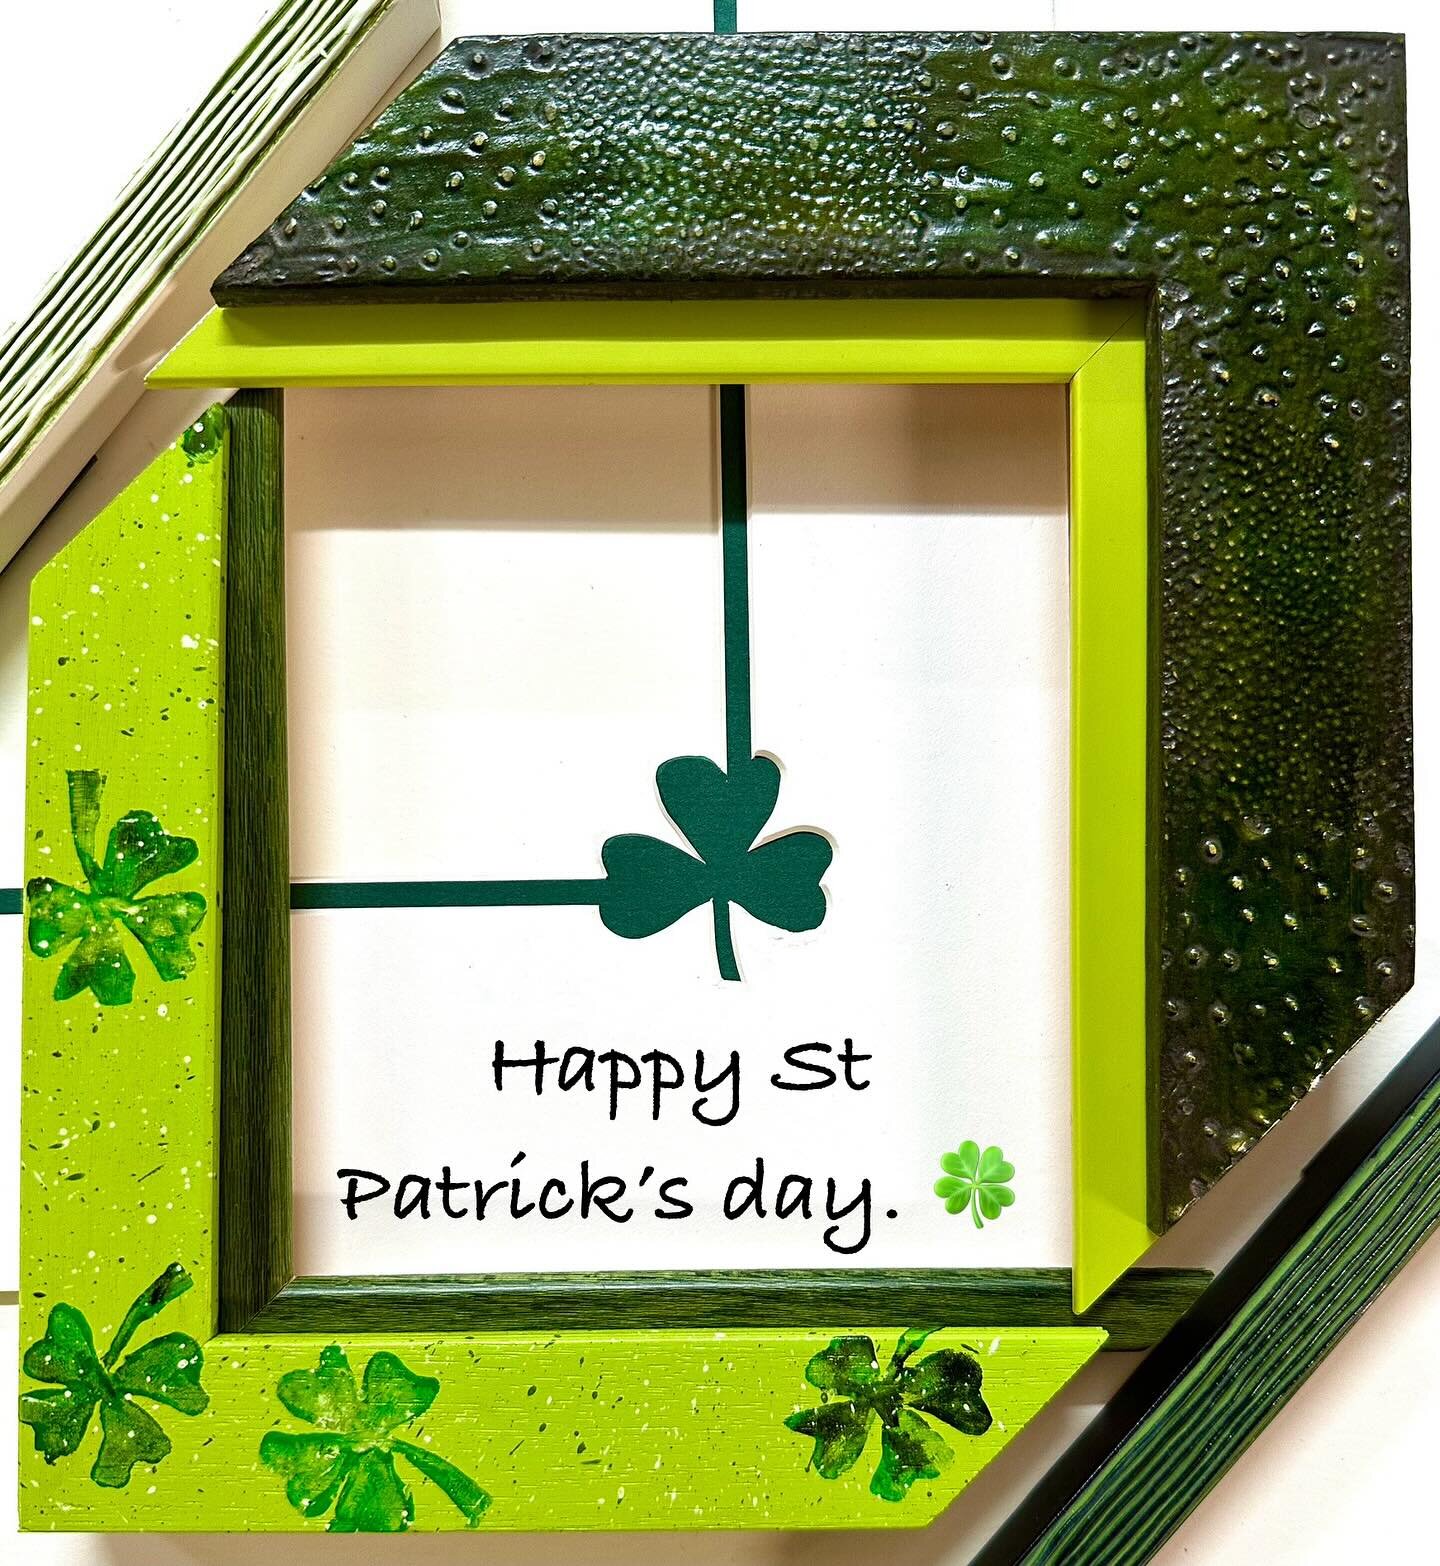 &ldquo;May luck be your friend in whatever you do, and trouble be always a stranger to you!&rdquo;Happy St Patrick&rsquo;s day. Here&rsquo;s a few of our lucky verdant offerings. 🍀 Slainte 🥂 #framingfabulous #greenframes #lucky #stpatricksday #hand